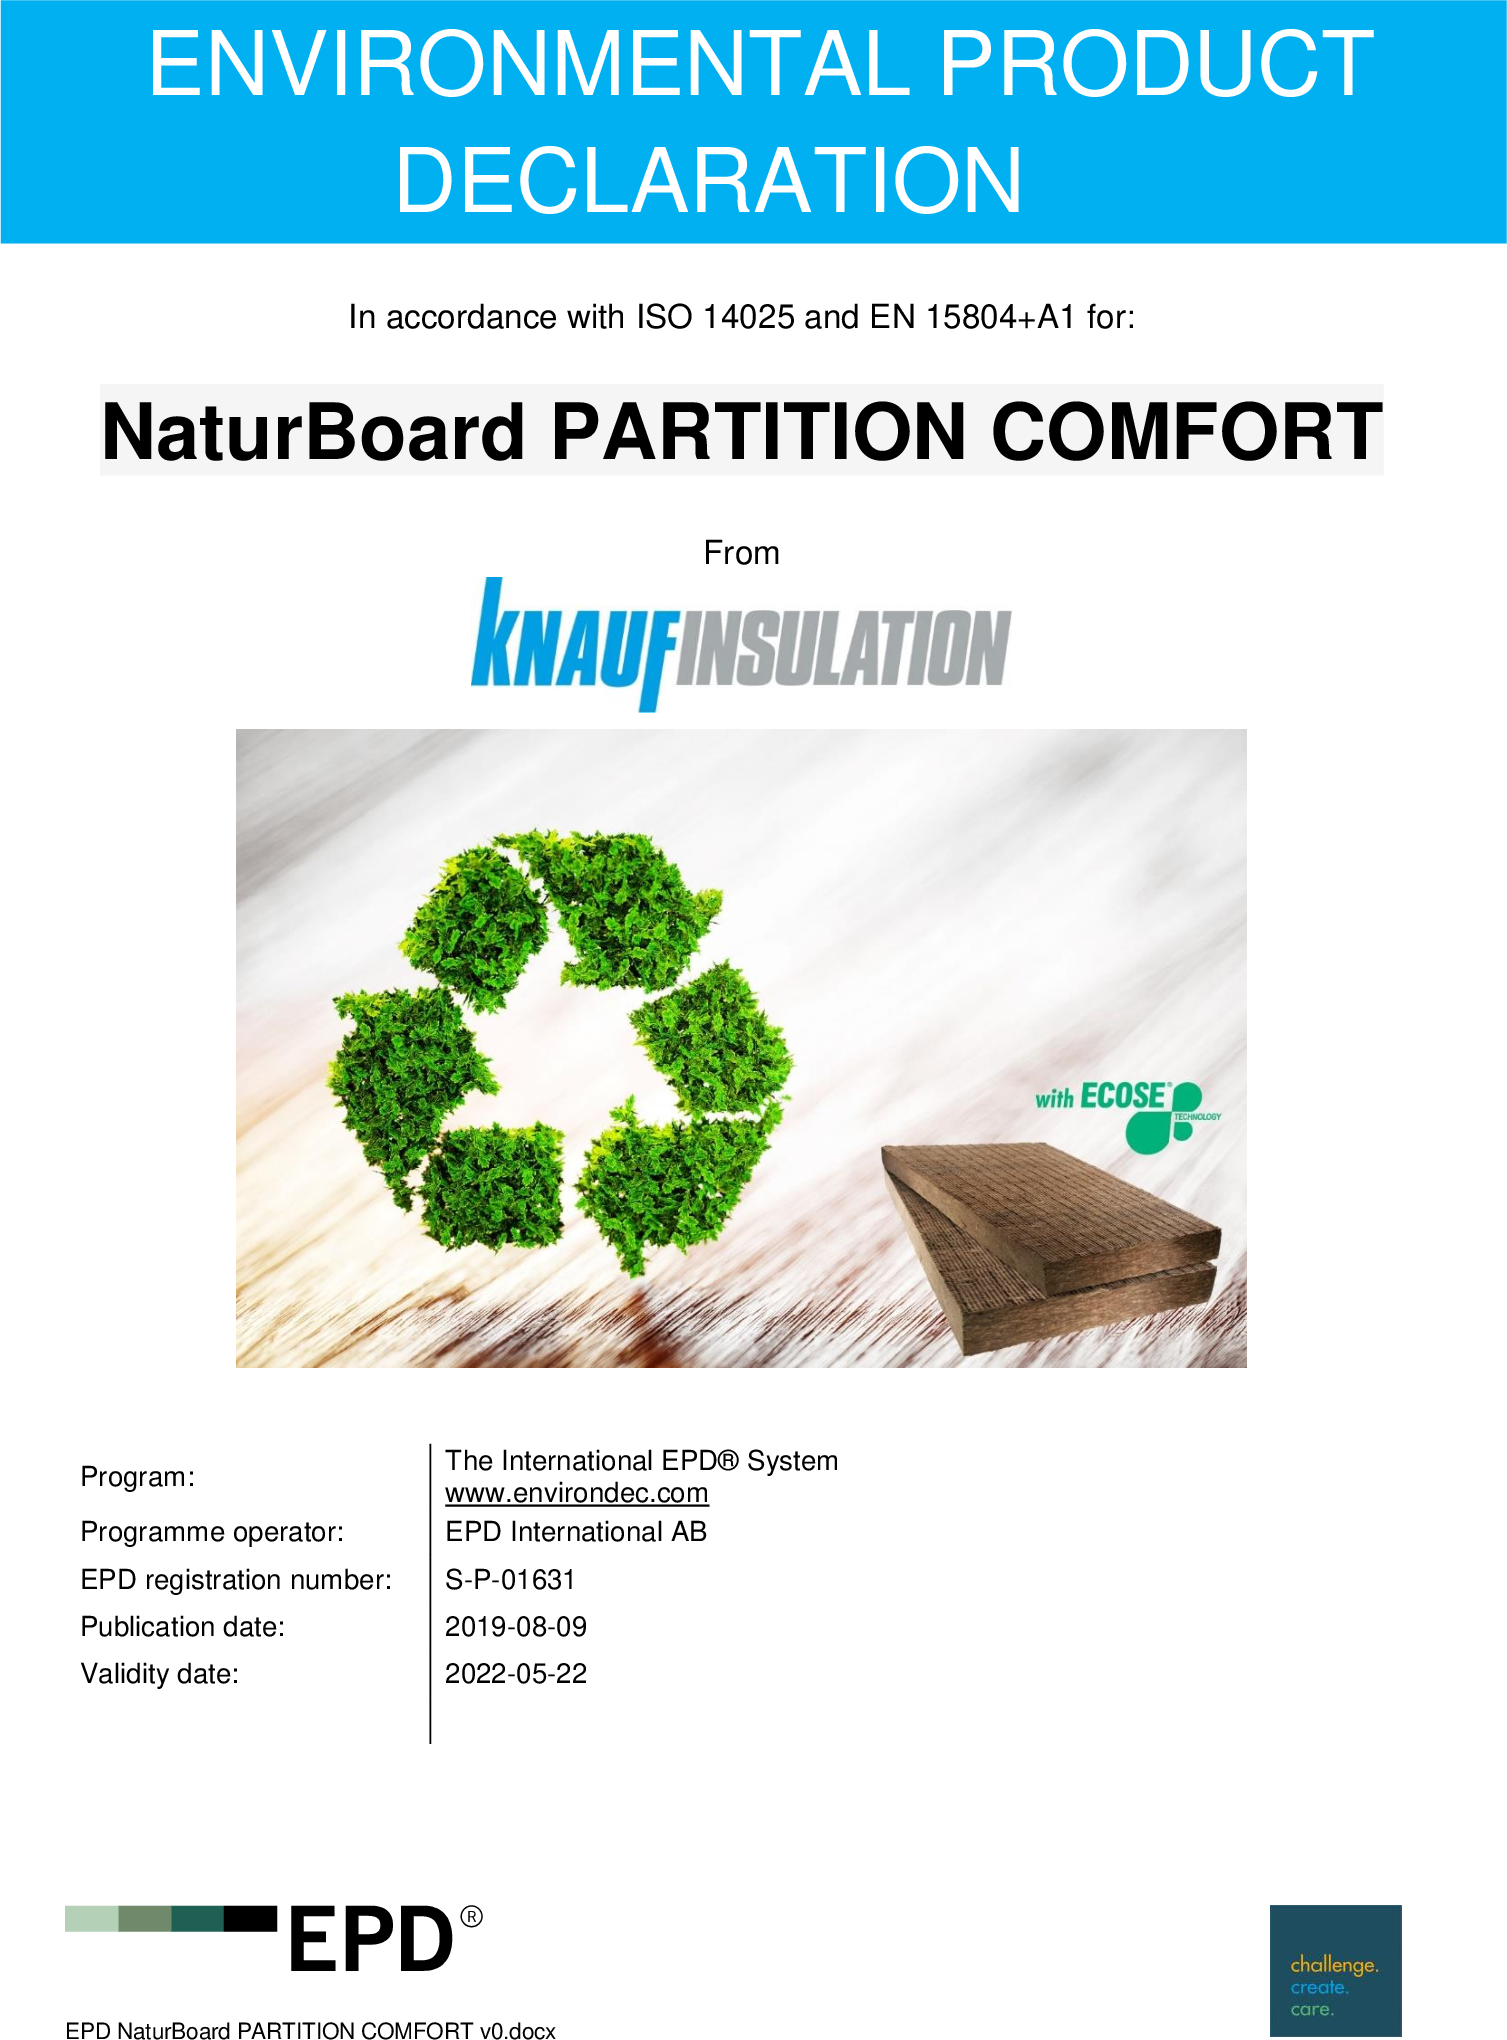 NaturBoard PARTITION COMFORT